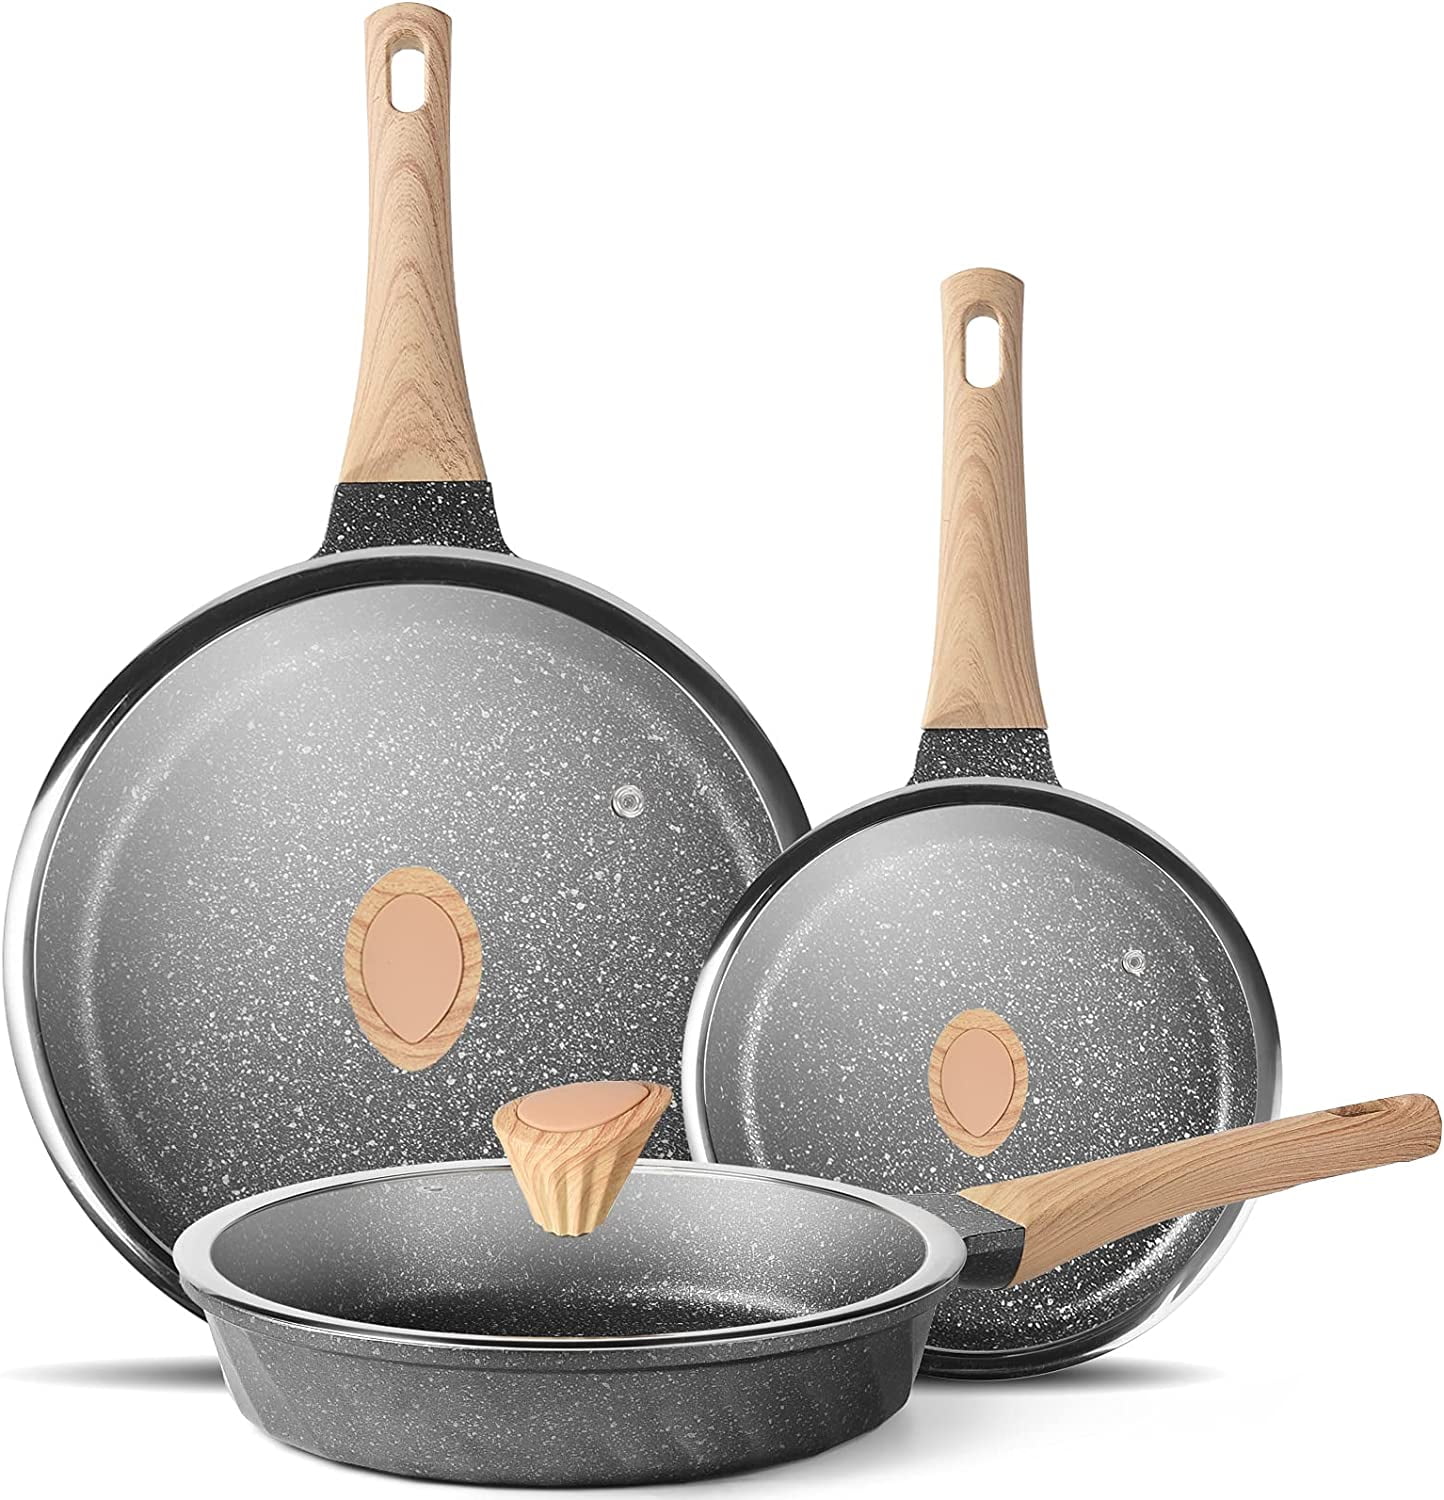 Stainless Steel Frying Pan Set Cooking Pan Skillets Oven Safe Induction  Skillet, Pots and Pans Set - Bed Bath & Beyond - 39042171